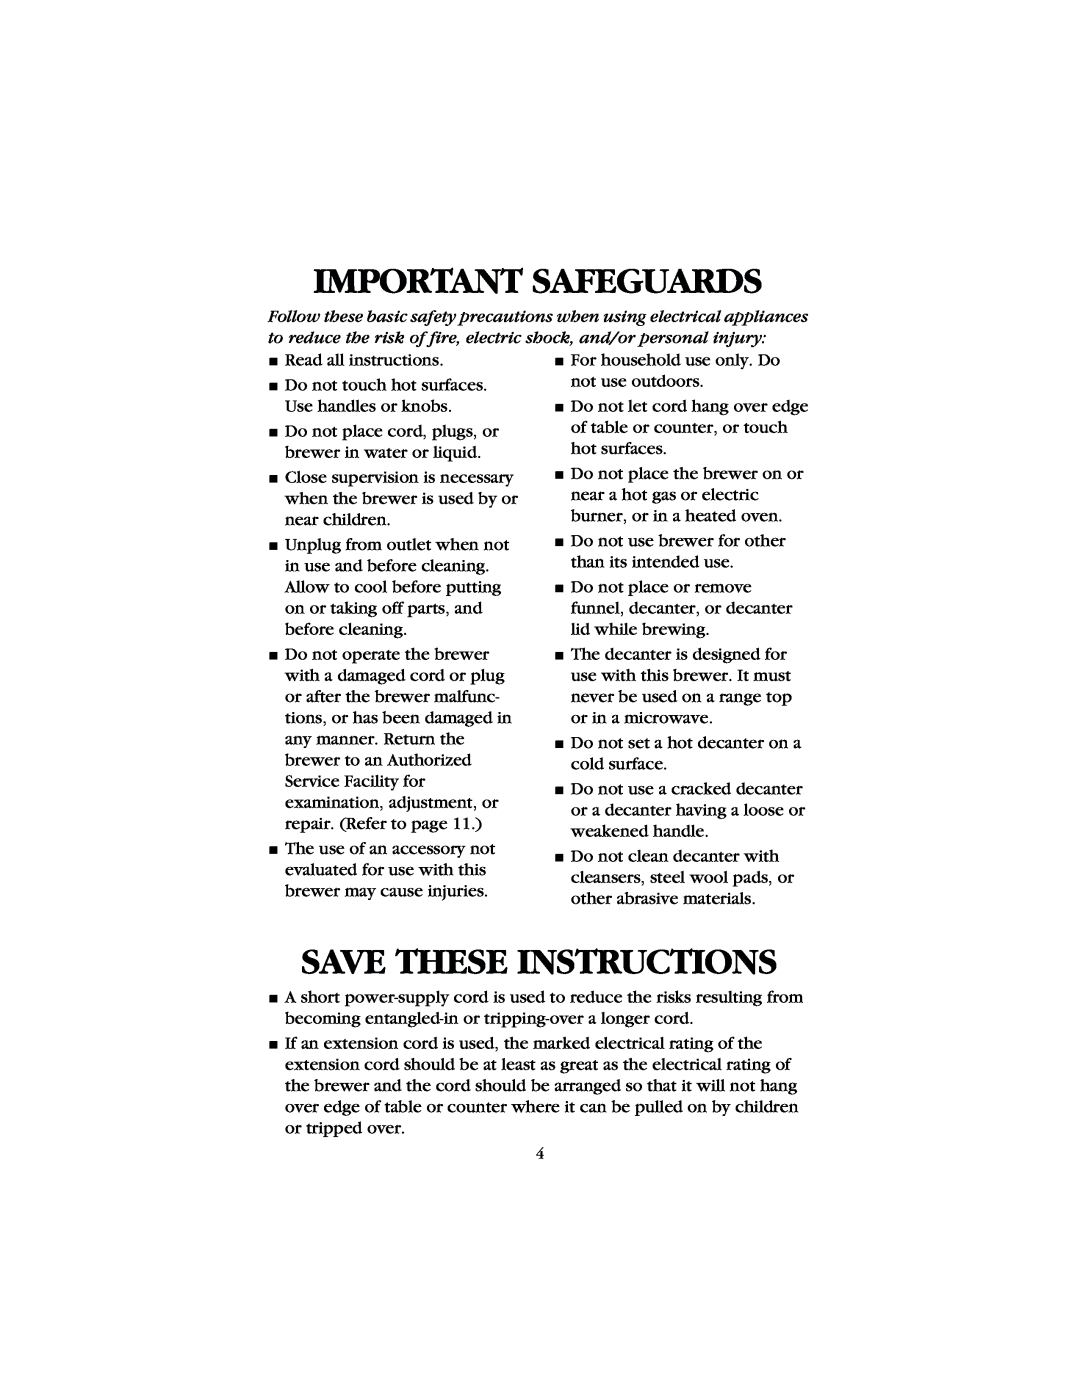 Bunn GR, B8 manual Important Safeguards, Save These Instructions 